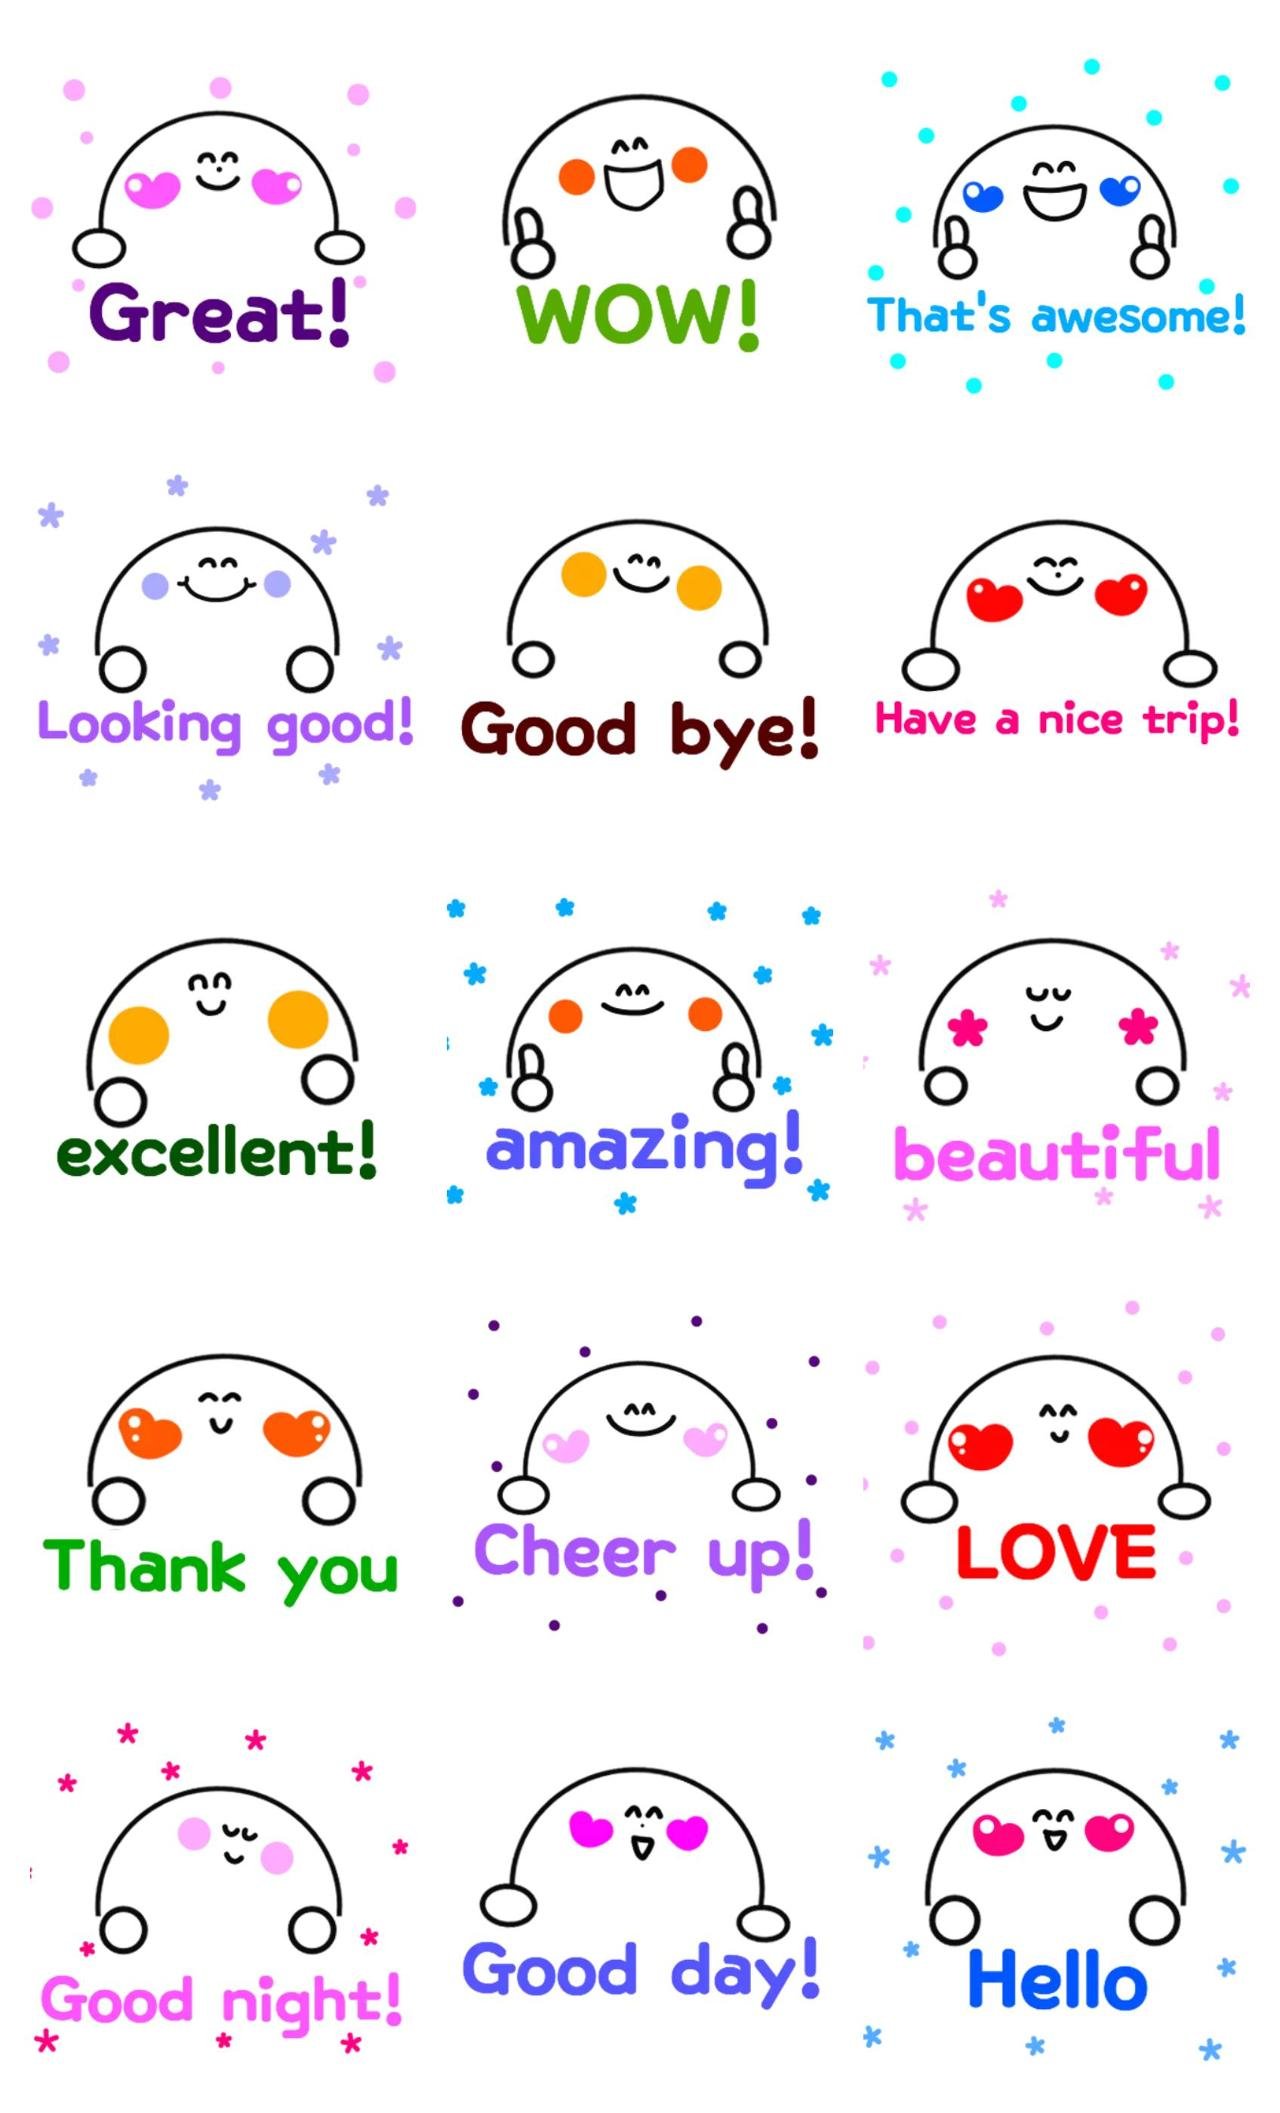 Cute friend Celebrity,Romance sticker pack for Whatsapp, Telegram, Signal, and others chatting and message apps